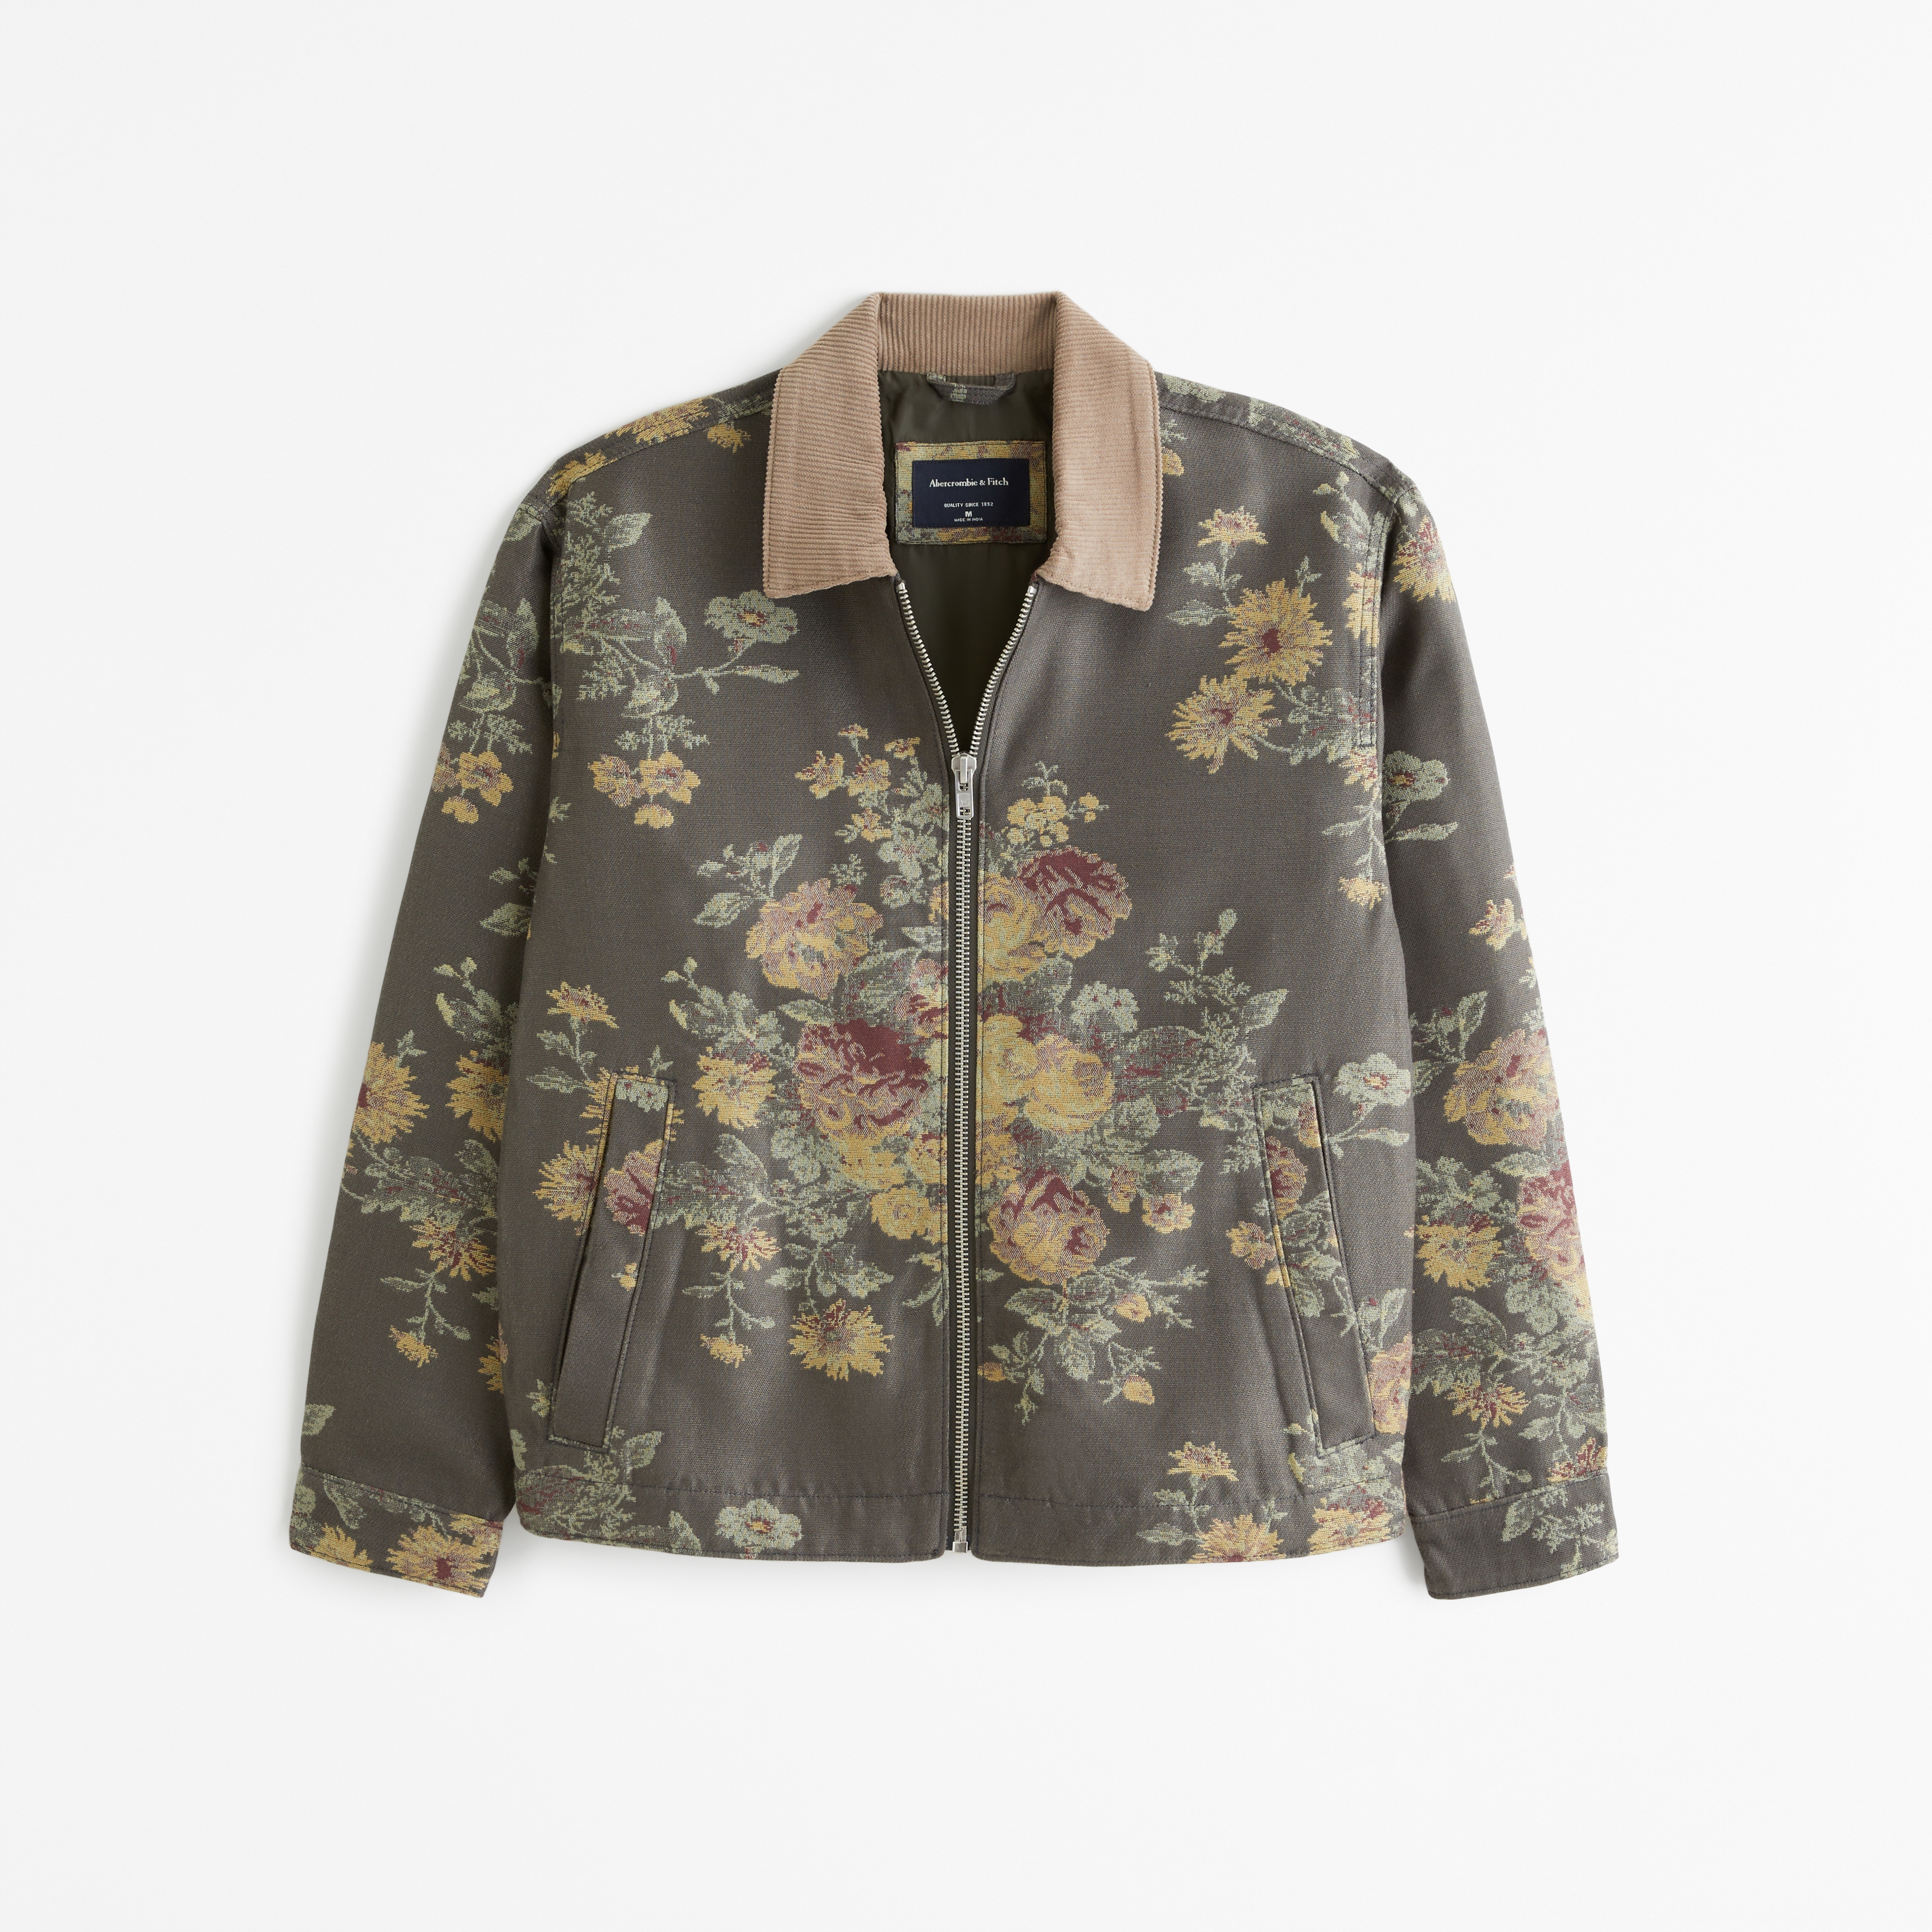 Men's Jacquard Jacket in Olive Green Floral | Size M | Abercrombie u0026 Fitch